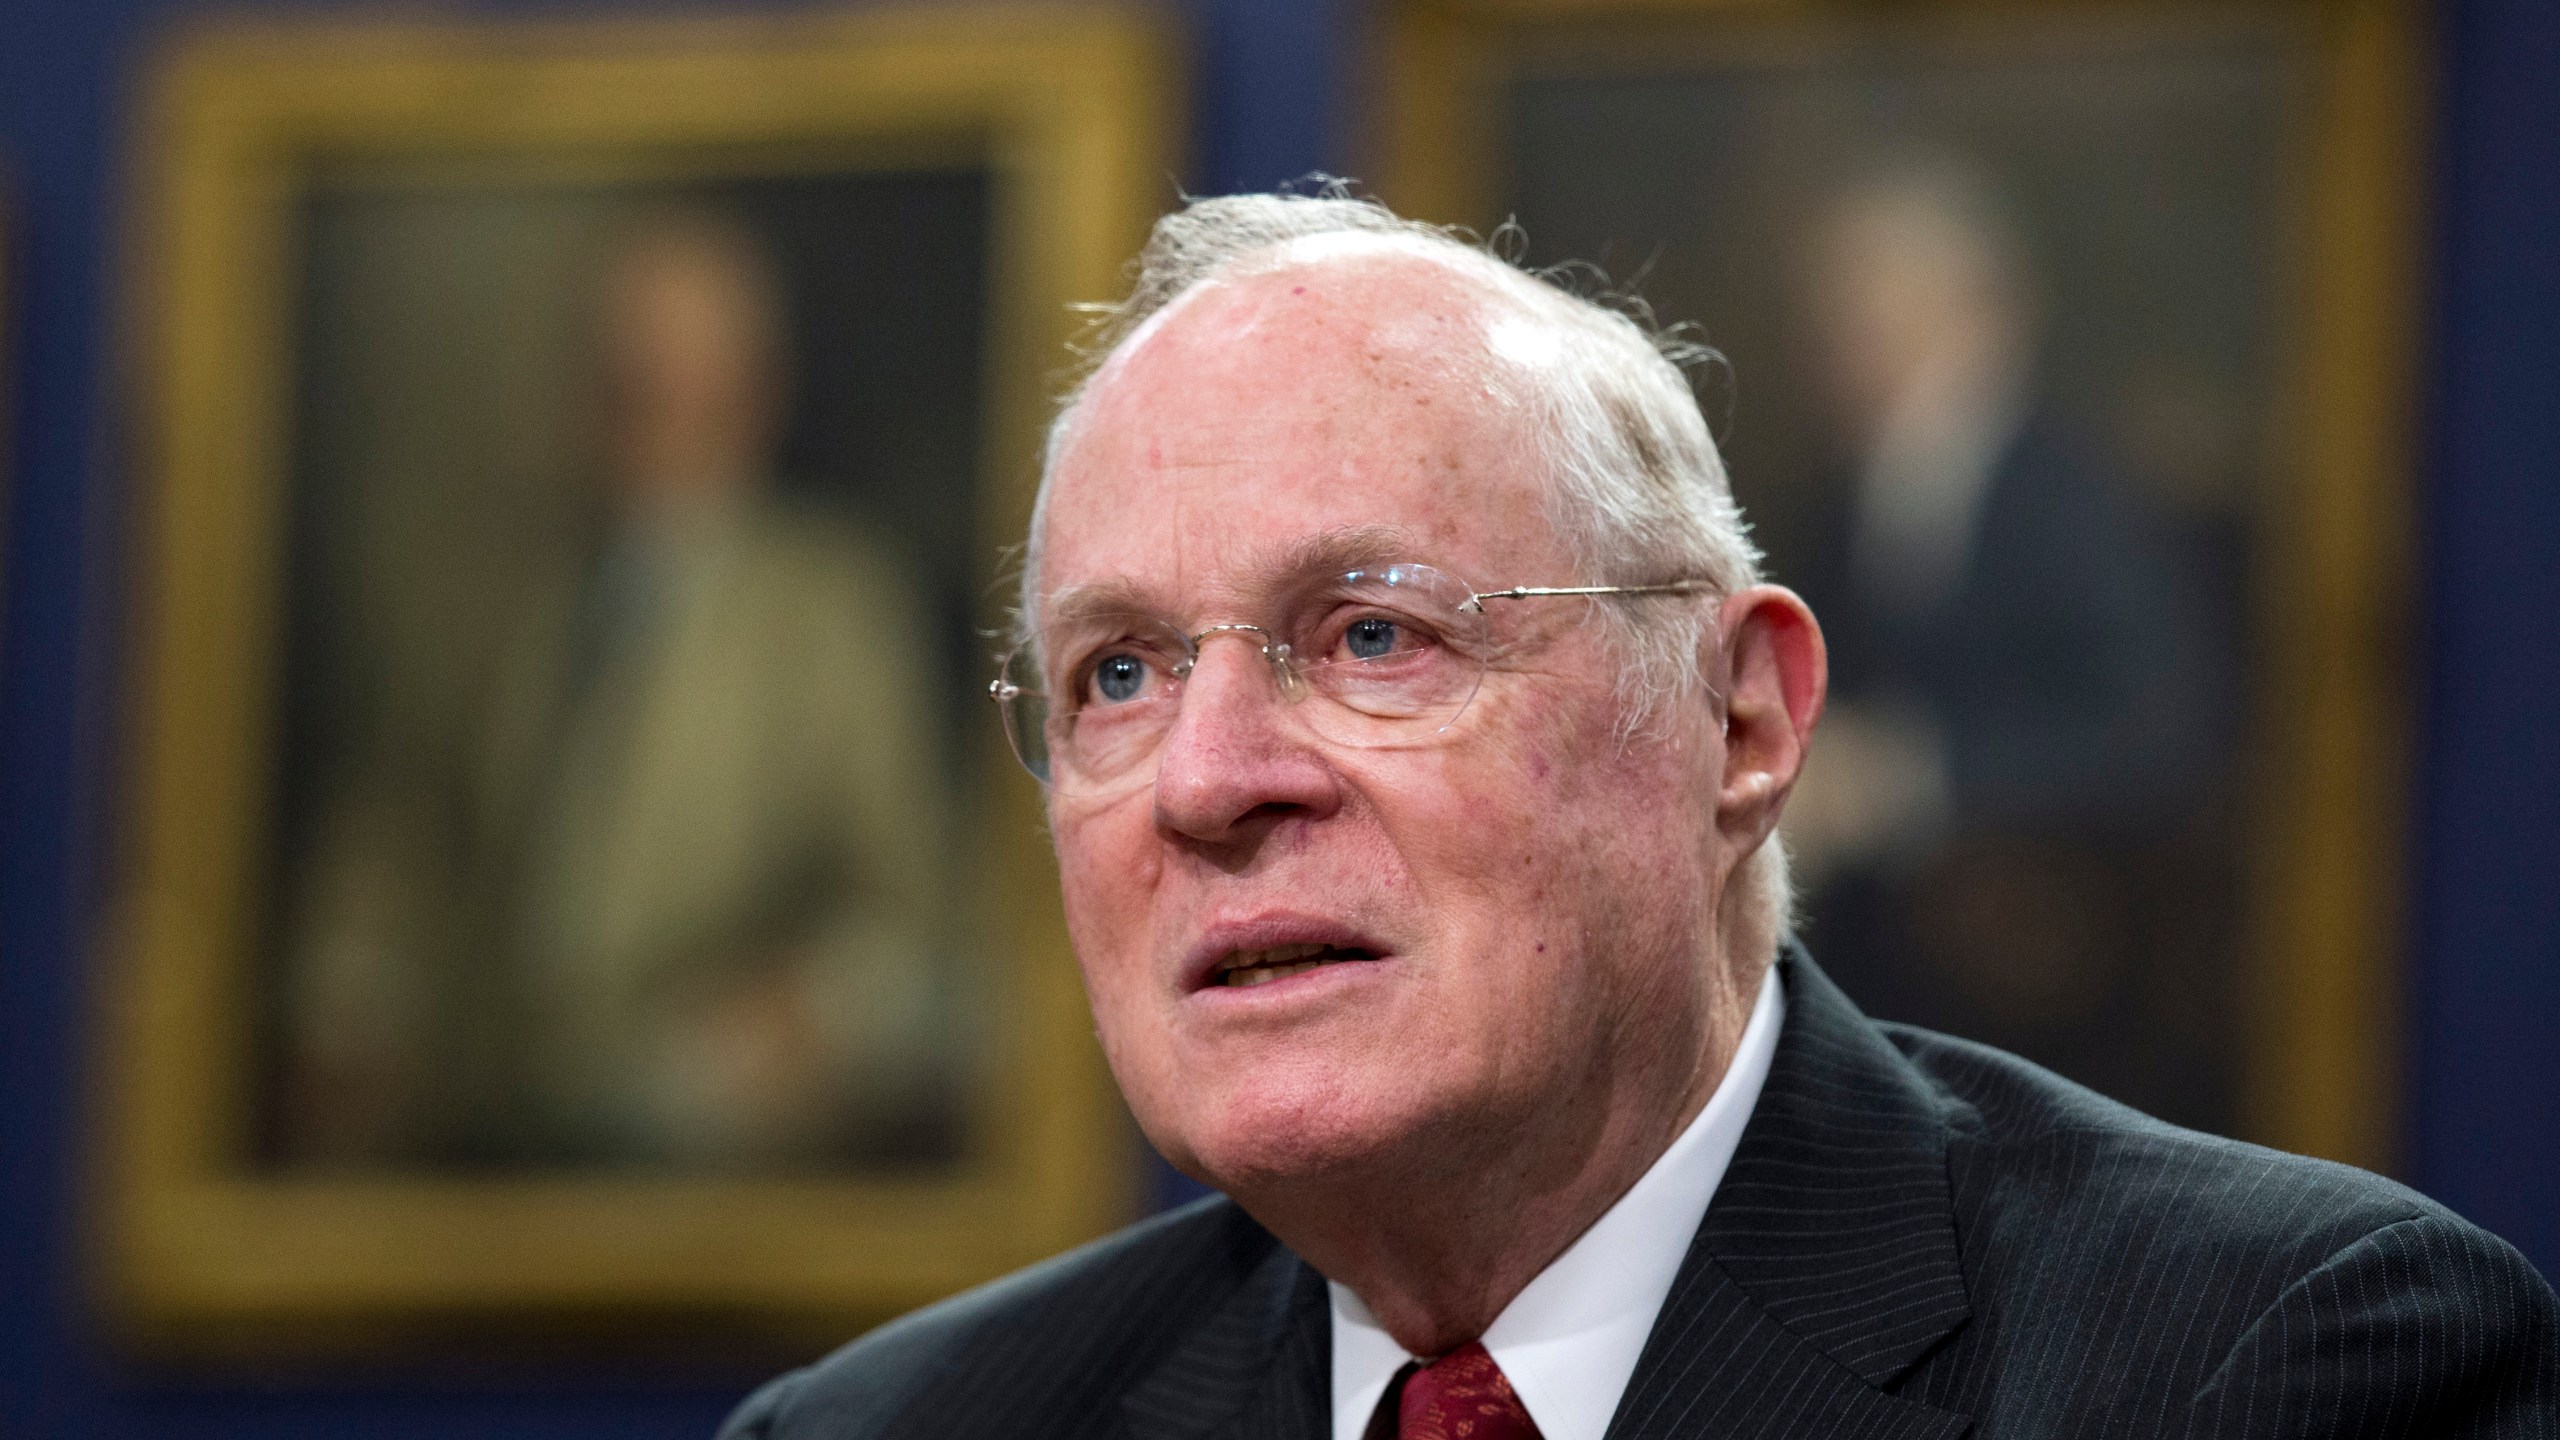 FILE - Retired Supreme Court Justice Anthony Kennedy testifies before a House Committee on Appropriations Subcommittee on Financial Services hearing on Capitol Hill in Washington on March 23, 2015. (AP Photo/Manuel Balce Ceneta, File)